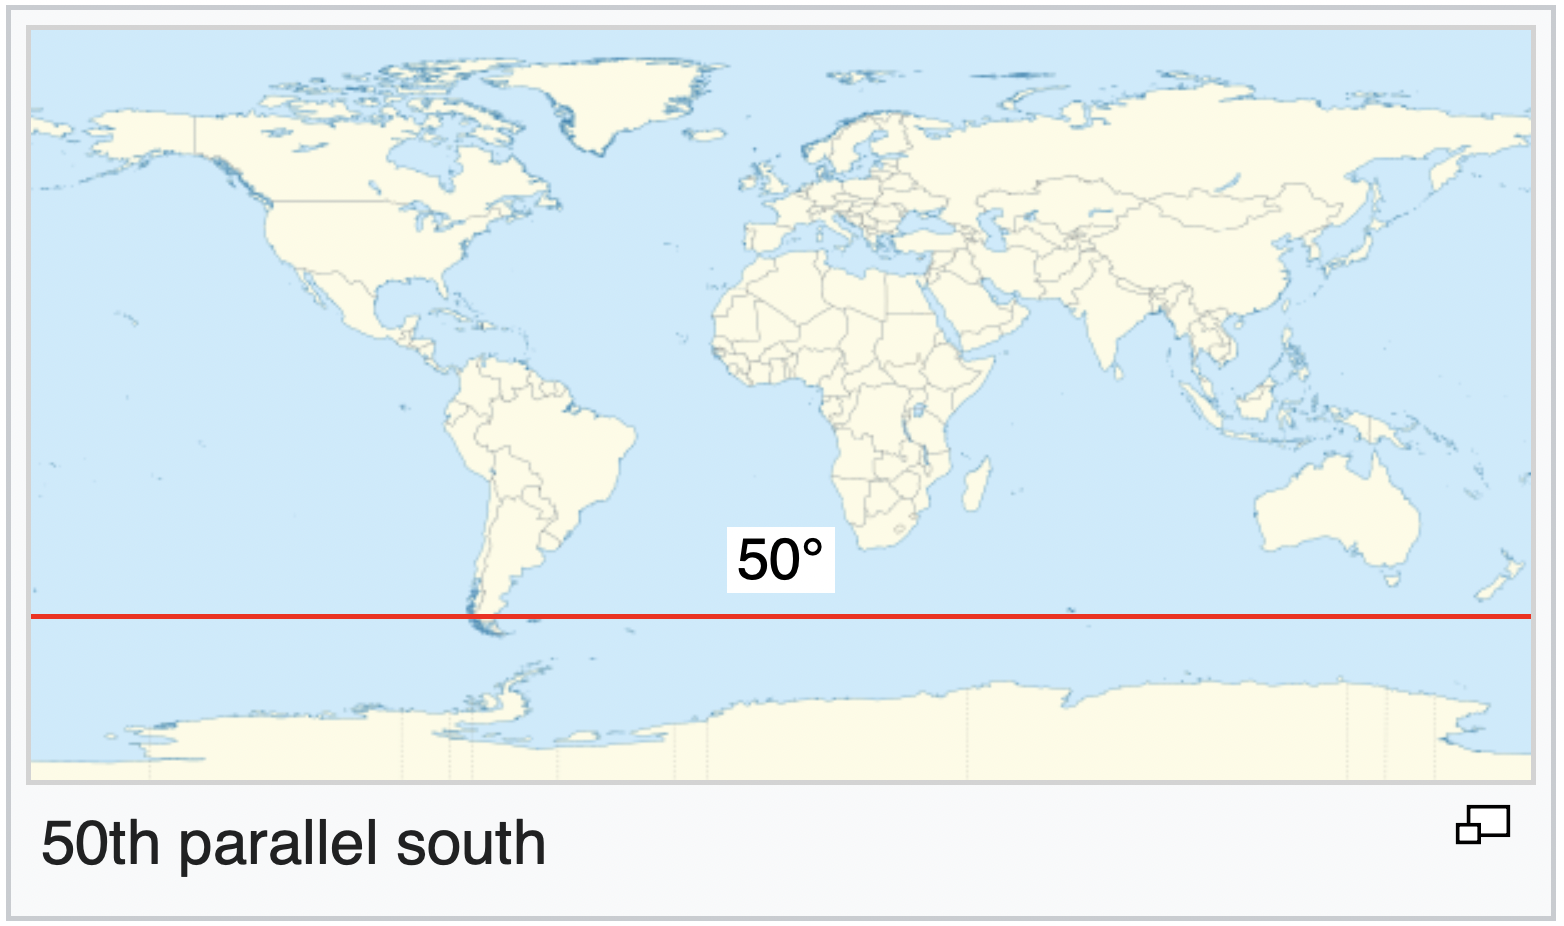 A map of the world marking 50th parallel south